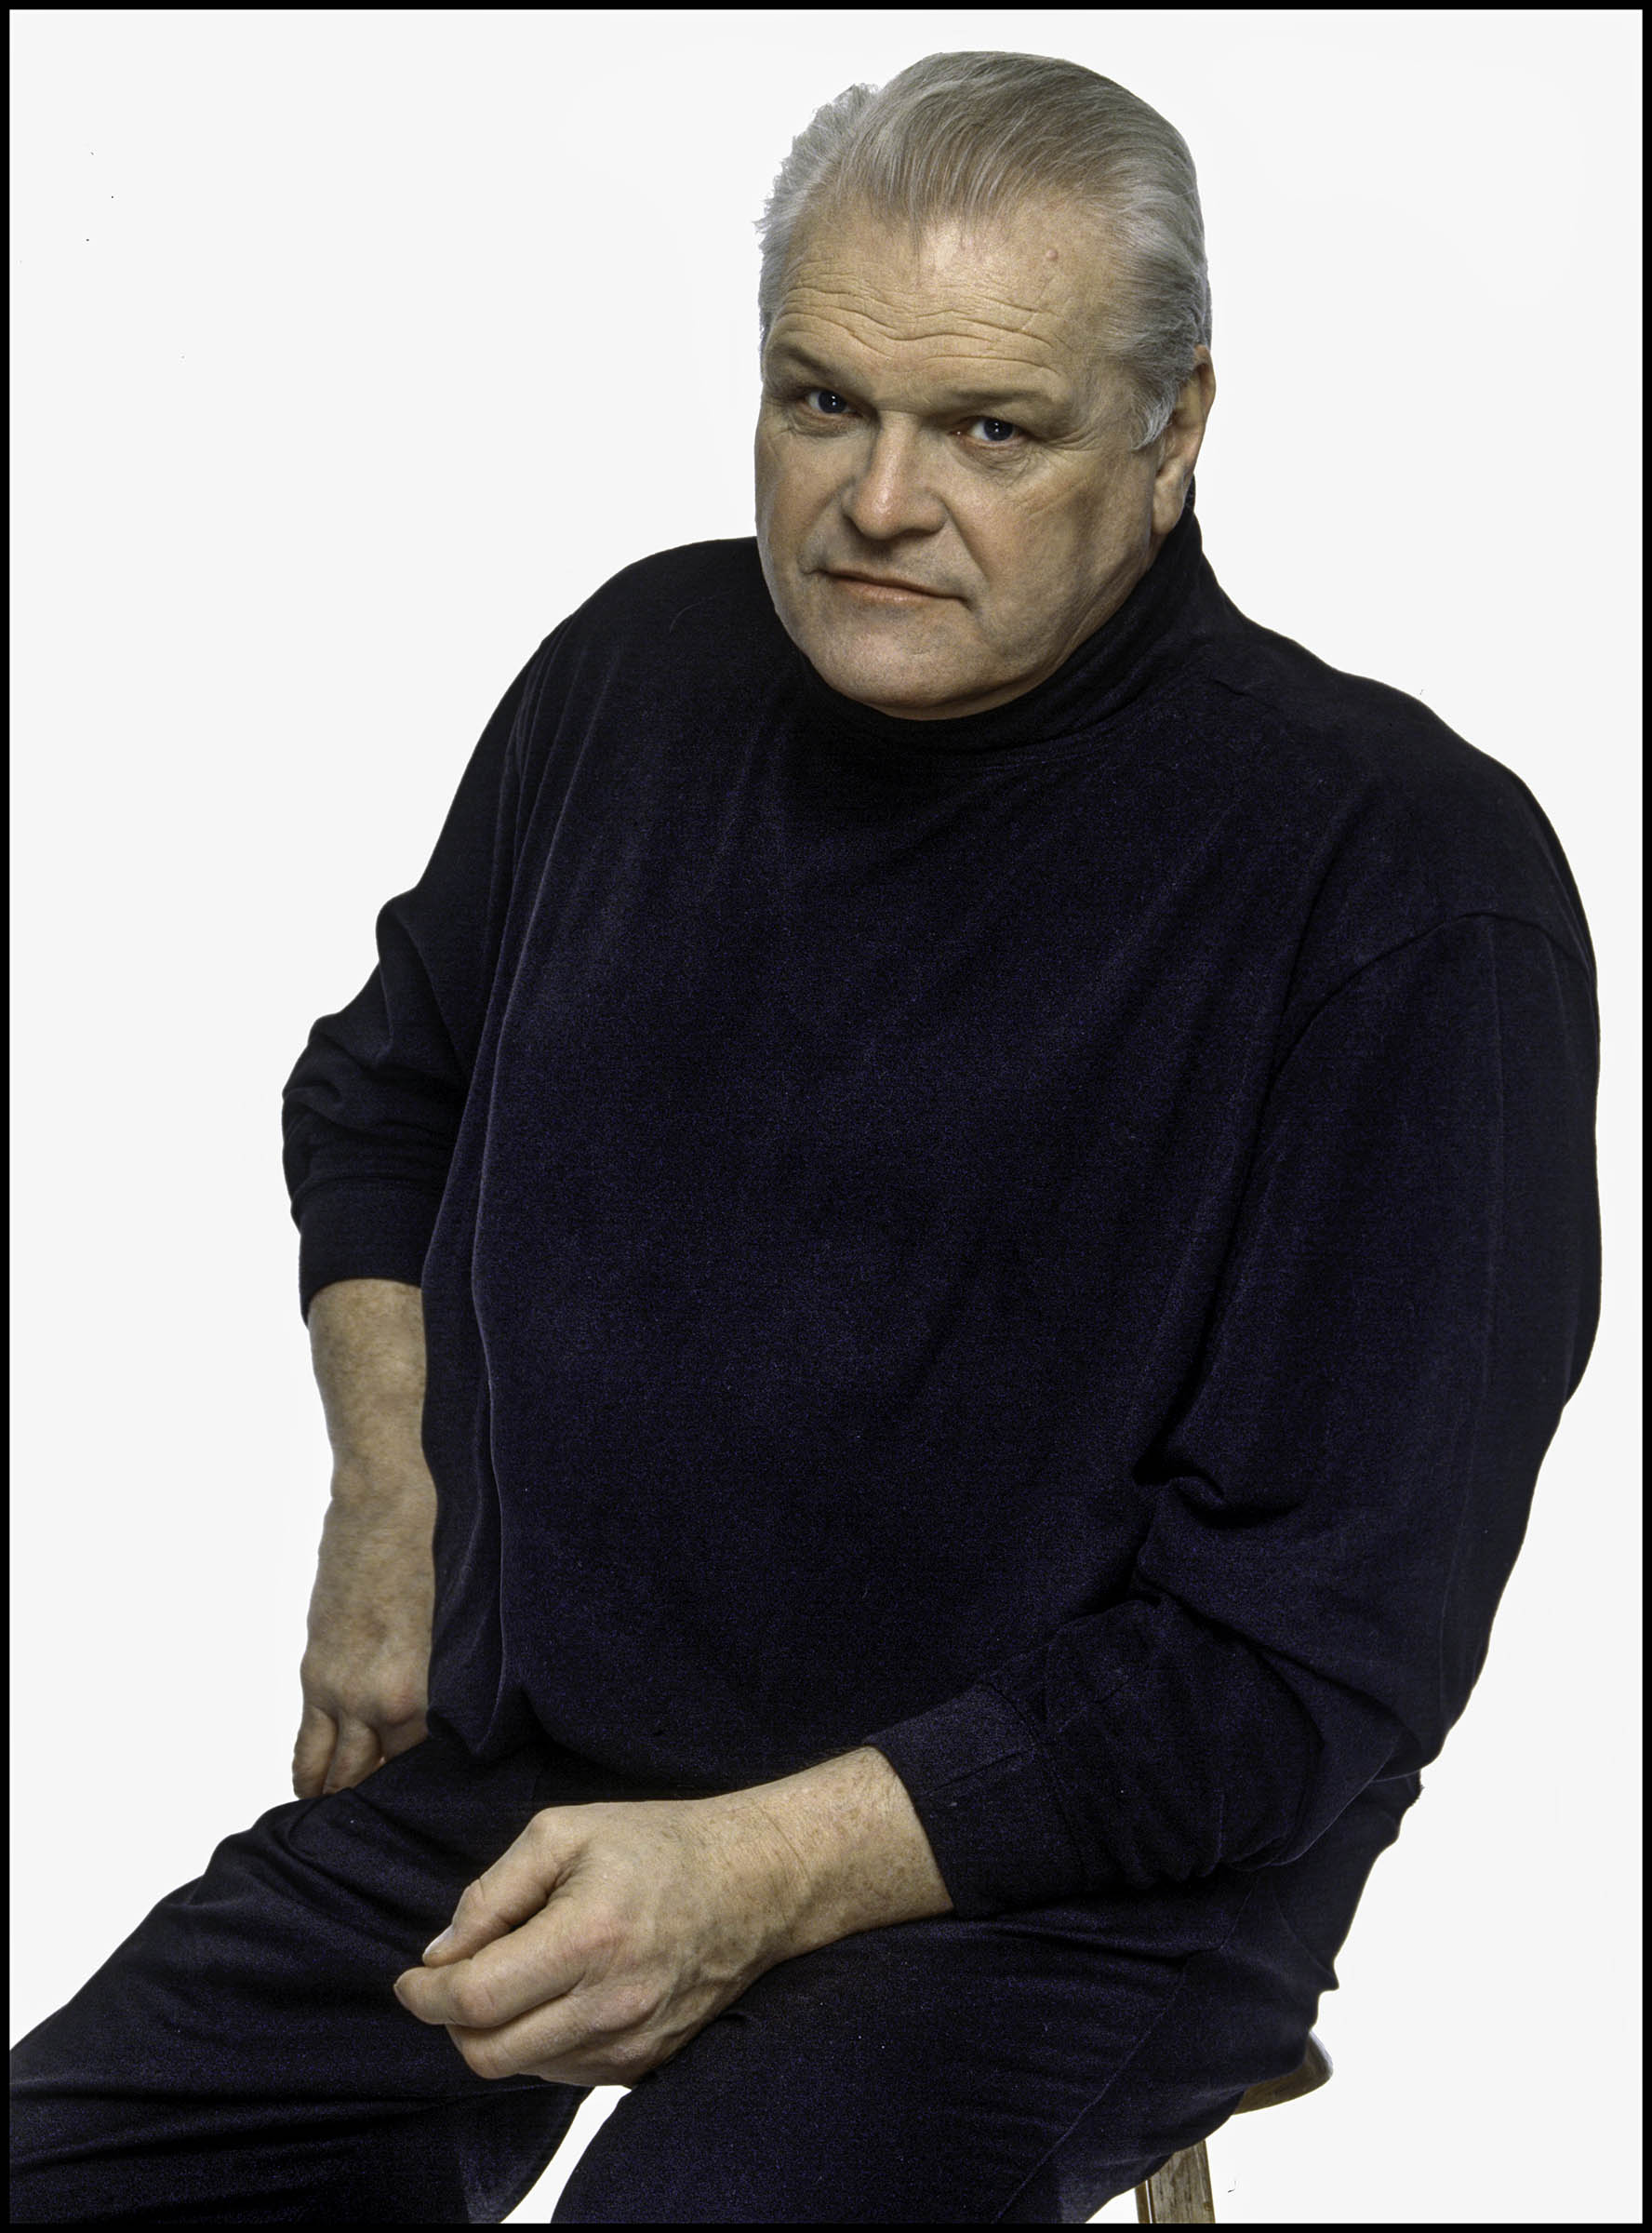 Brian Dennehy was an American actor of stage, television, and film. He won two Tony Awards, an Olivier Award, and a Golden Globe, and received six Primetime Emmy Award nominations. Dennehy had roles in over 180 films and in many television and stage productions. His film roles included First Blood (1982), Gorky Park (1983), Silverado (1985), Cocoon (1985), F/X (1986), Presumed Innocent (1990), Romeo + Juliet (1996), Ratatouille (2007), and Knight of Cups (2015). Dennehy won the Golden Globe Award for Best Actor in a Miniseries or Television Film for his role as Willy Loman in the television film Death of a Salesman (2000).  According to Variety, Dennehy was "perhaps the foremost living interpreter" of playwright Eugene O